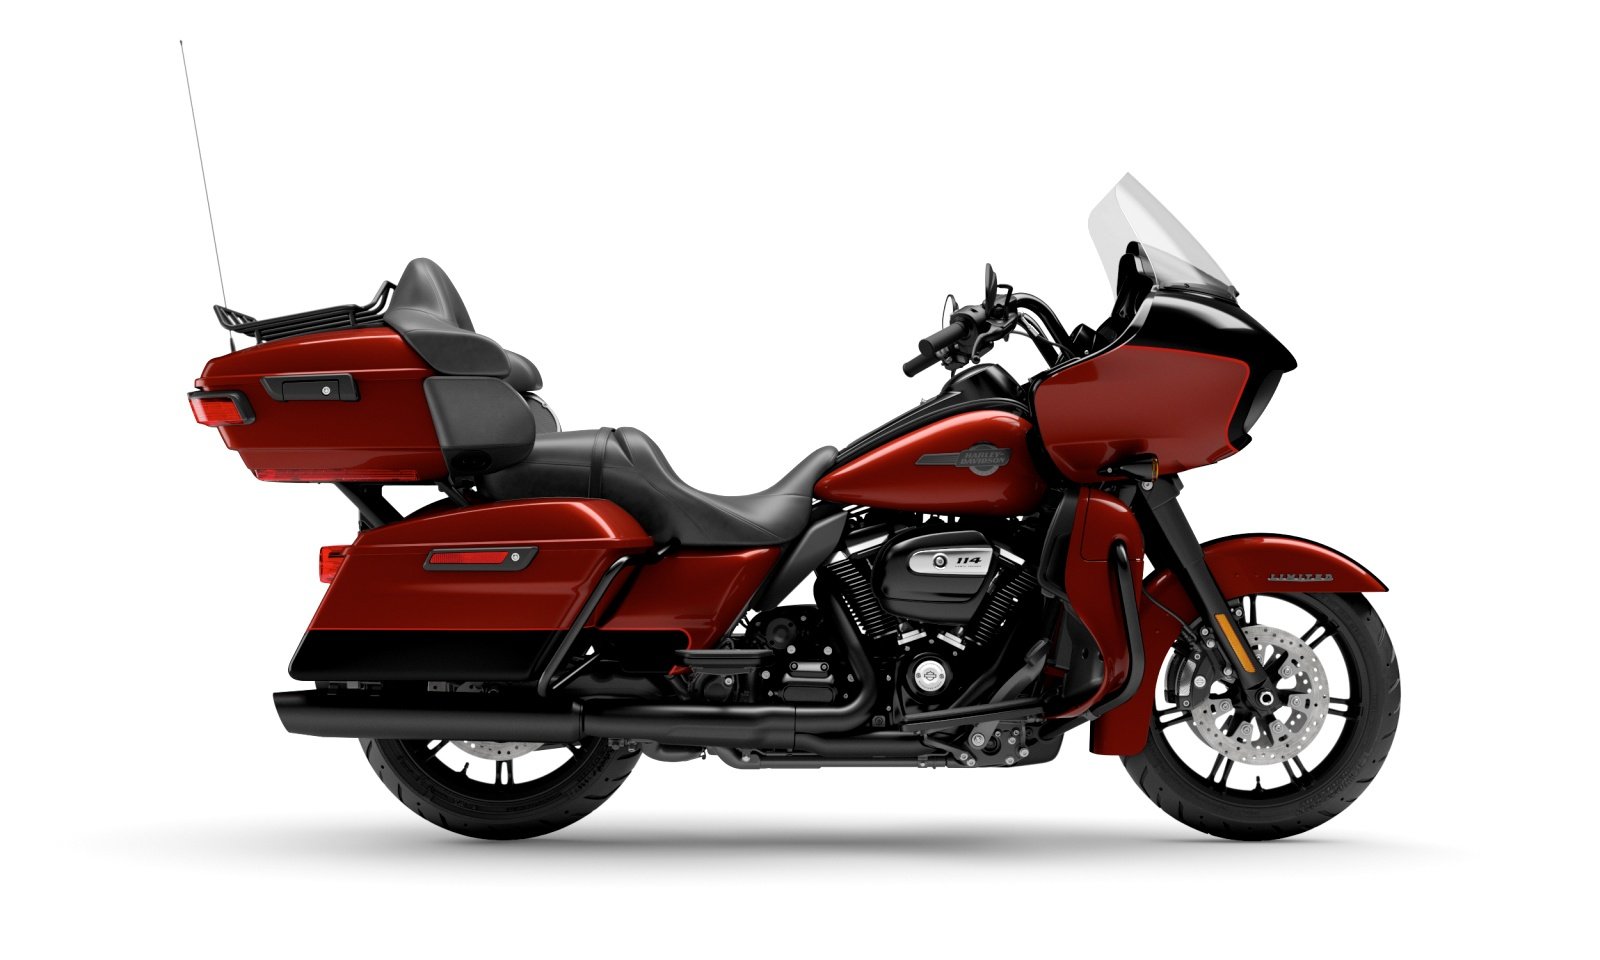 https://www.harley-davidson.com/content/dam/h-d/images/product-images/bikes/motorcycle/2024/2024-road-glide-limited/2024-road-glide-limited-m15b/360/2024-road-glide-limited-m15b-motorcycle-01.jpg?impolicy=myresize&rw=1600